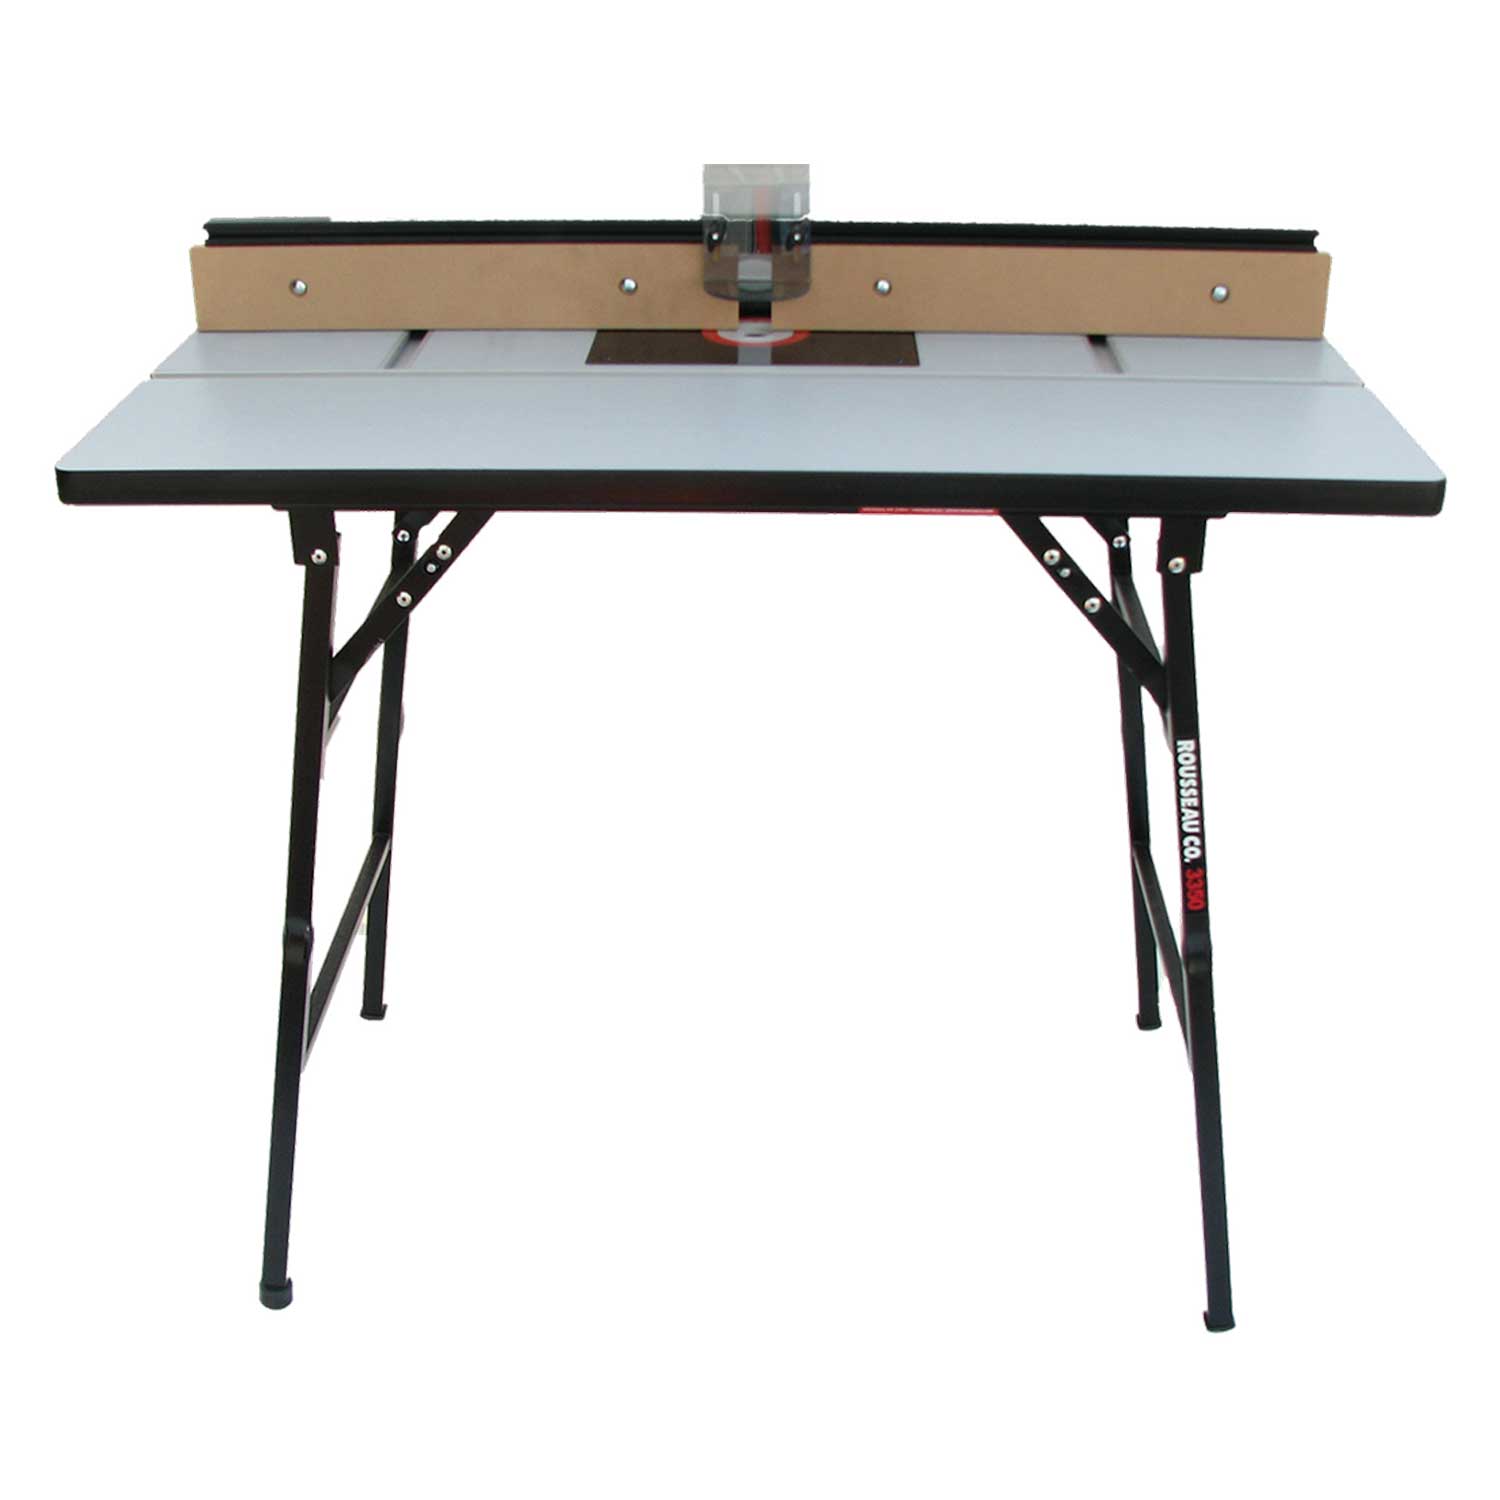 Heavy Duty Stand Up Router Table Stand, 400lb Capacity